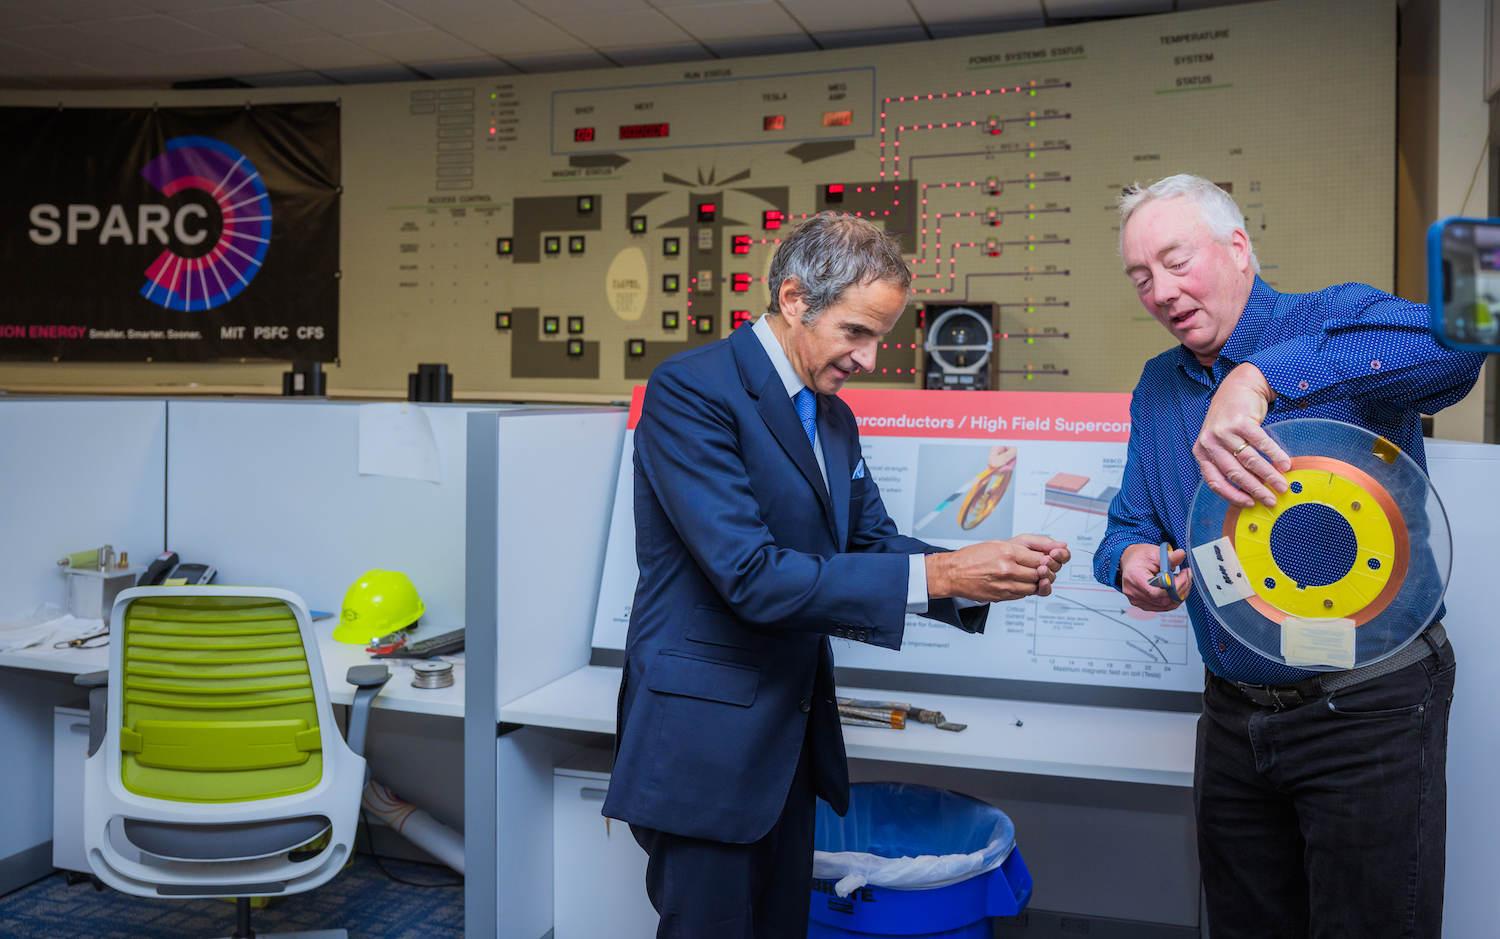 Dennis Whyte and Raphael Mariano Grossi stand in front of a retro-looking scientific control panel as Dennis shows Raphael a piece of high-temperature superconducting tape used in fusion magnets. 